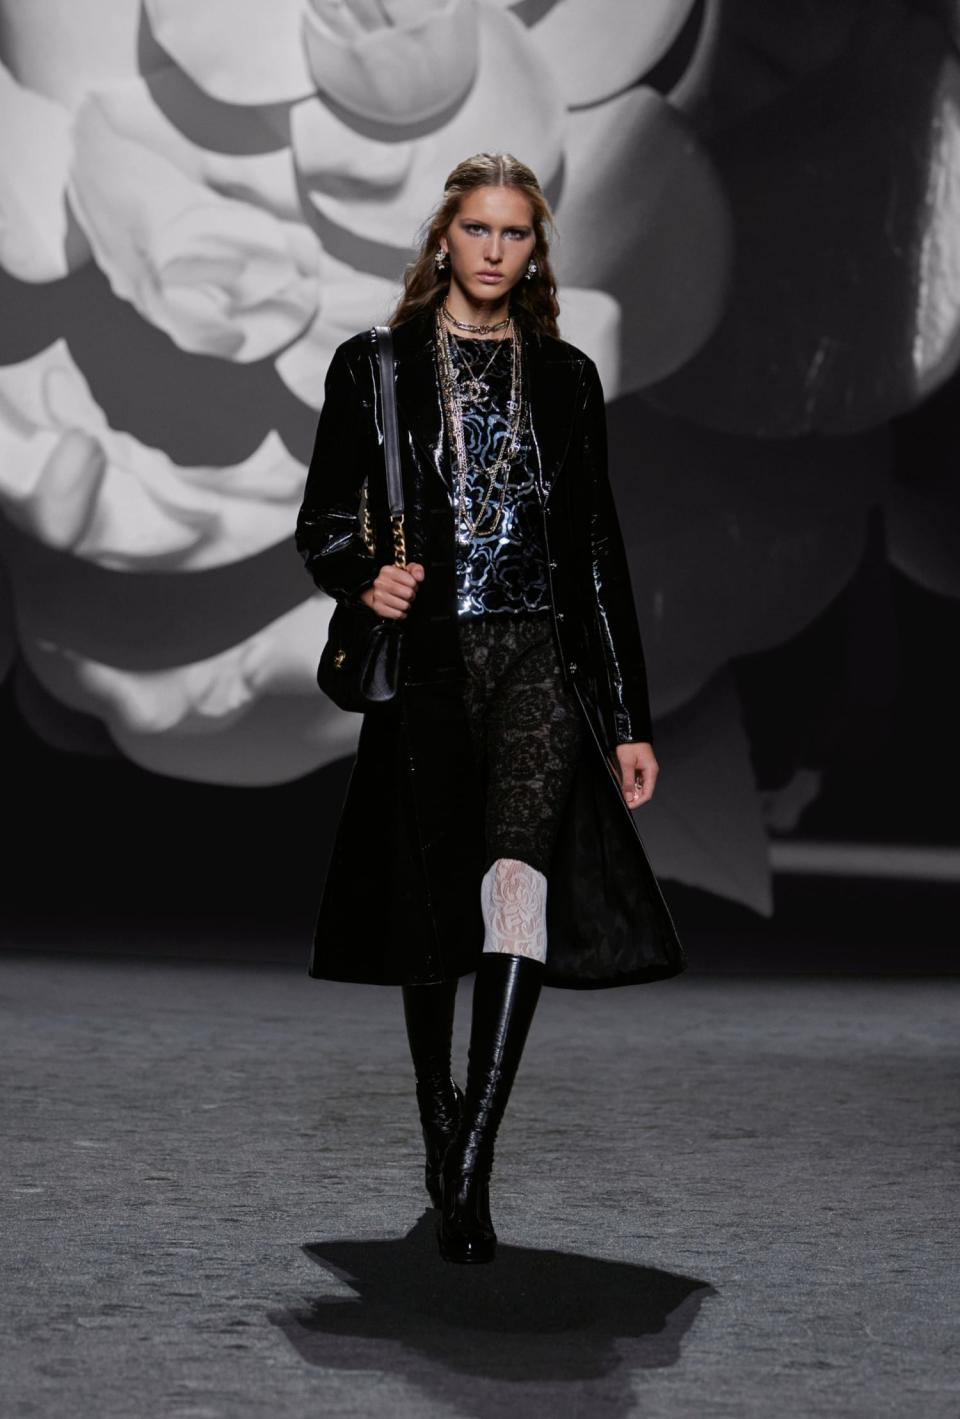 A model walking down the runway during Chanel's Fall/Winter 2023/24 show in Paris. (PHOTO: Chanel)